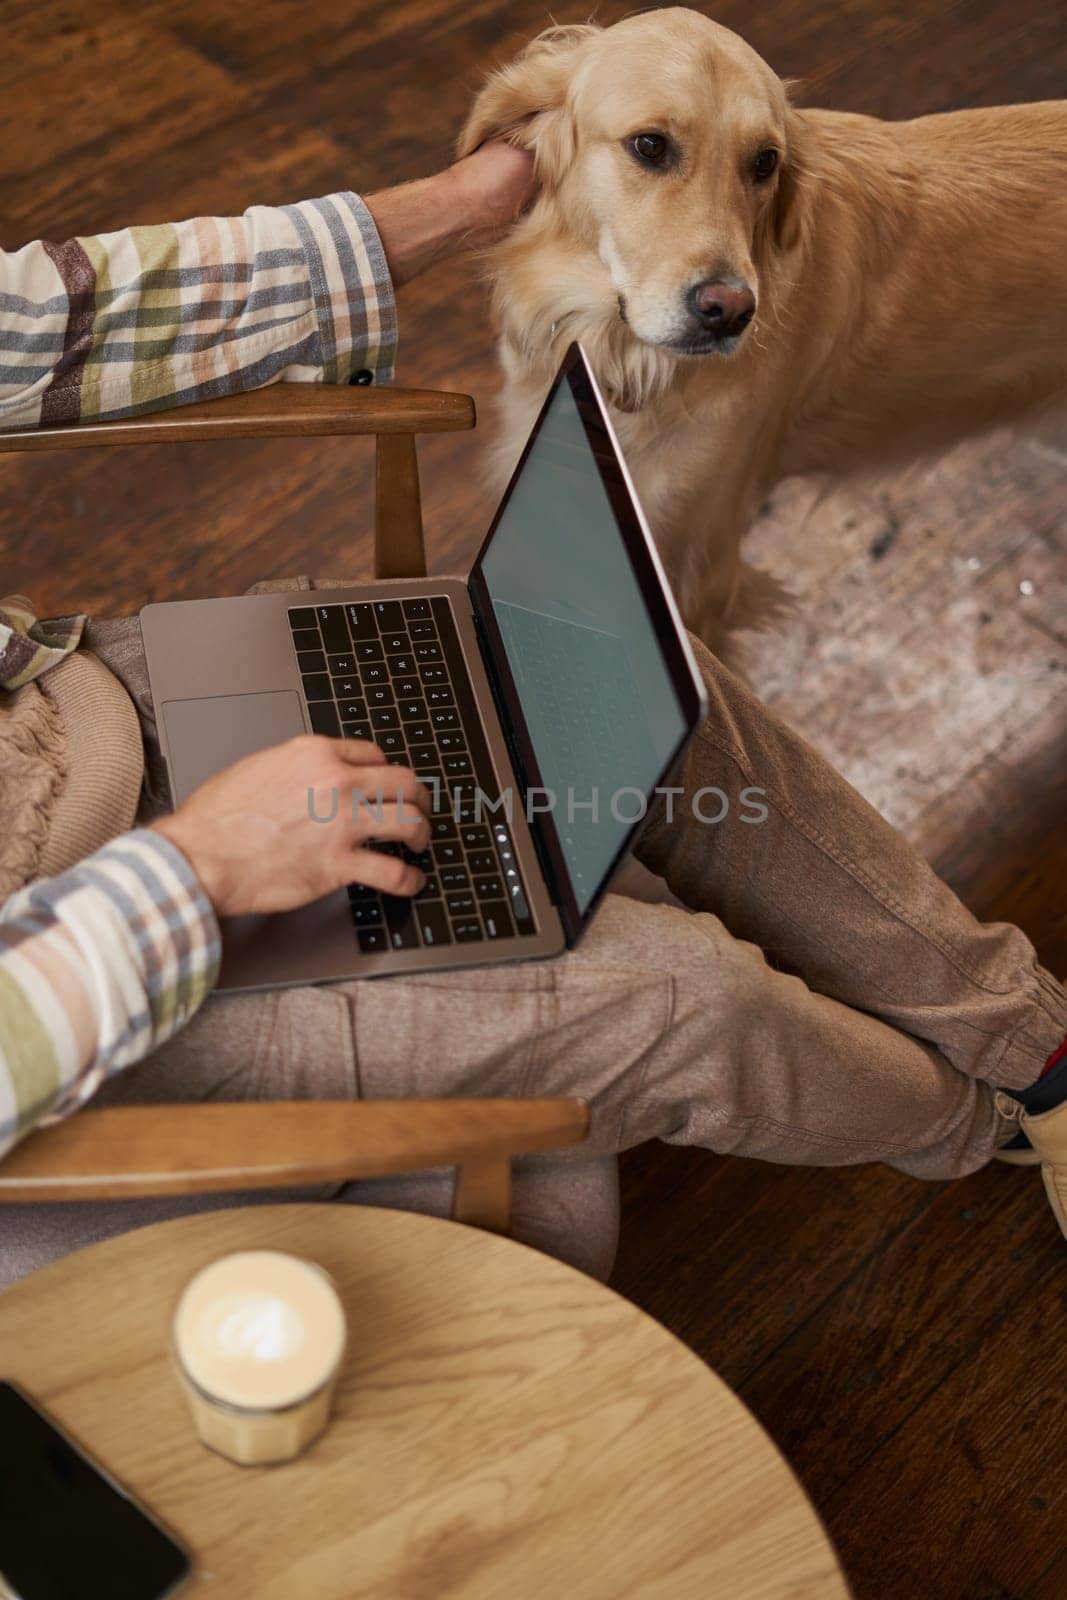 Vertical cropped picture of male hands typing on keyboard, using laptop and petting the dog, cafe visitor working and spending time with his puppy.